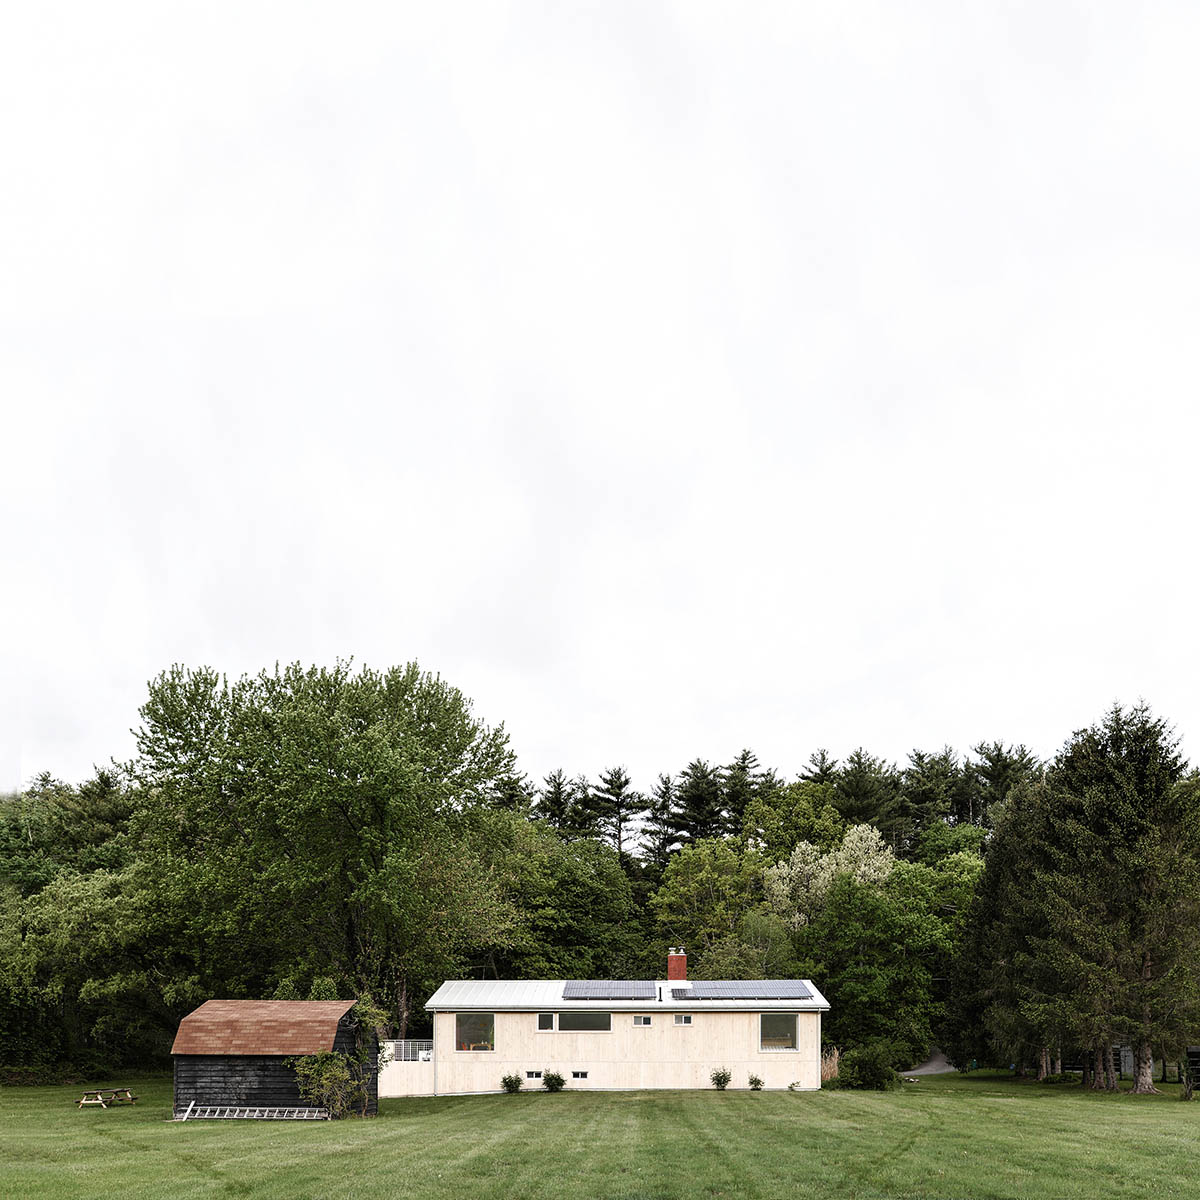 Ballman Khapalova converts 1980s ranch into a modern home with brightened rooms in Saugerties